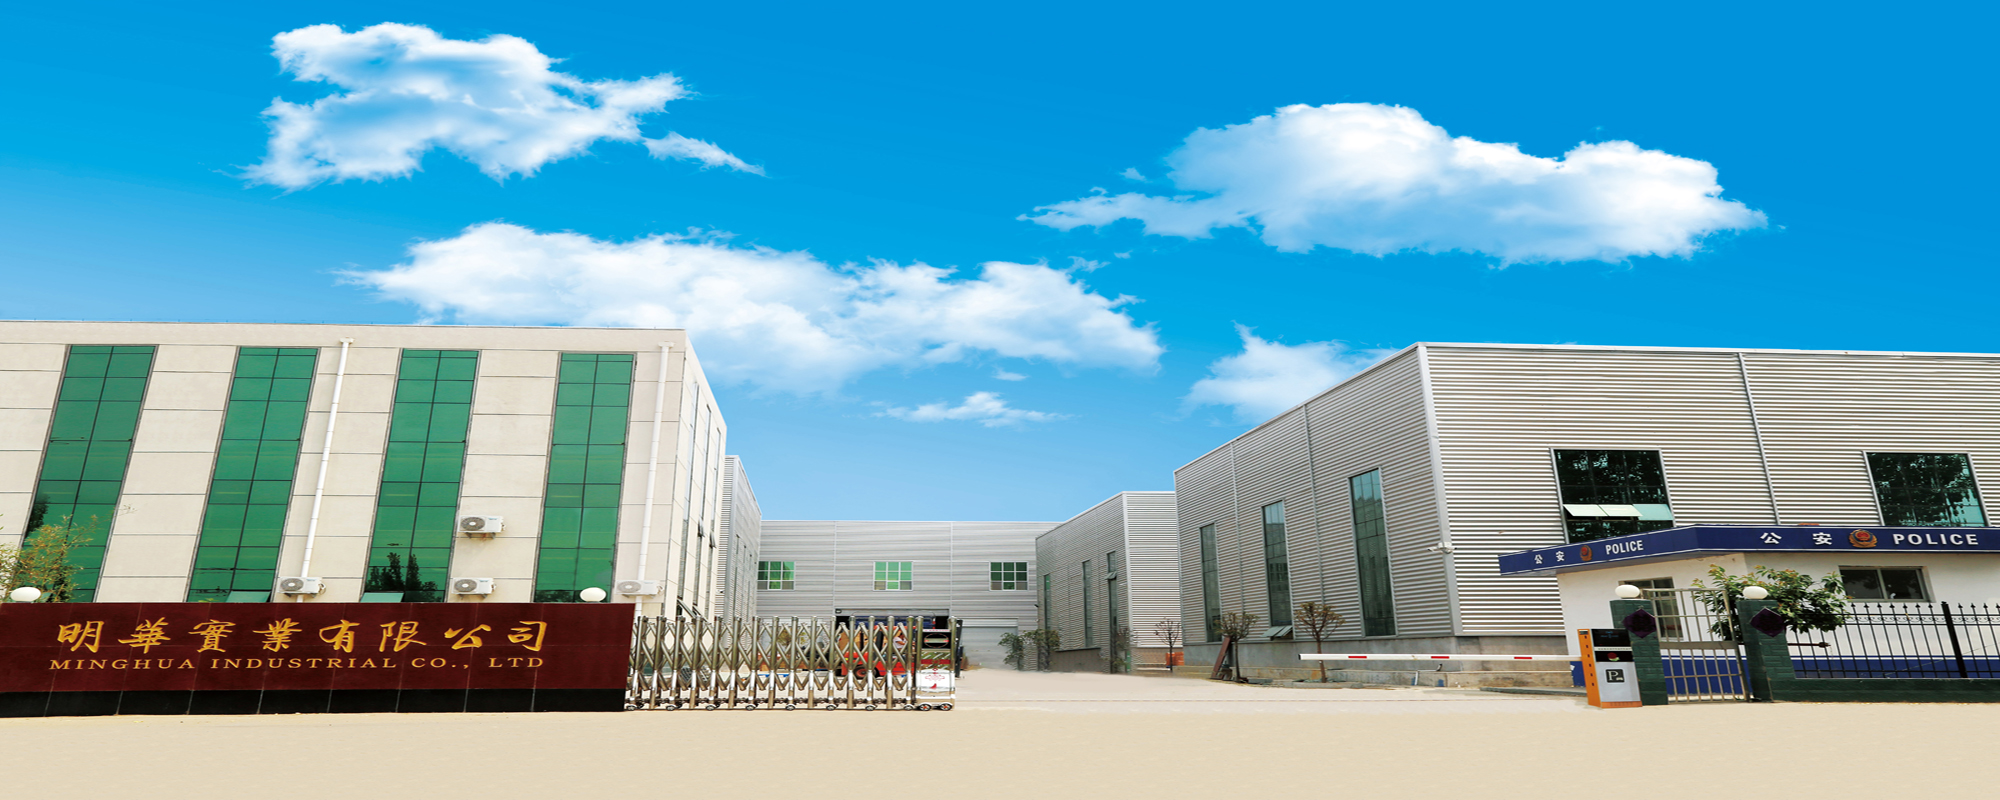 Welcome to Minghua Industrial Co.,Ltd.!